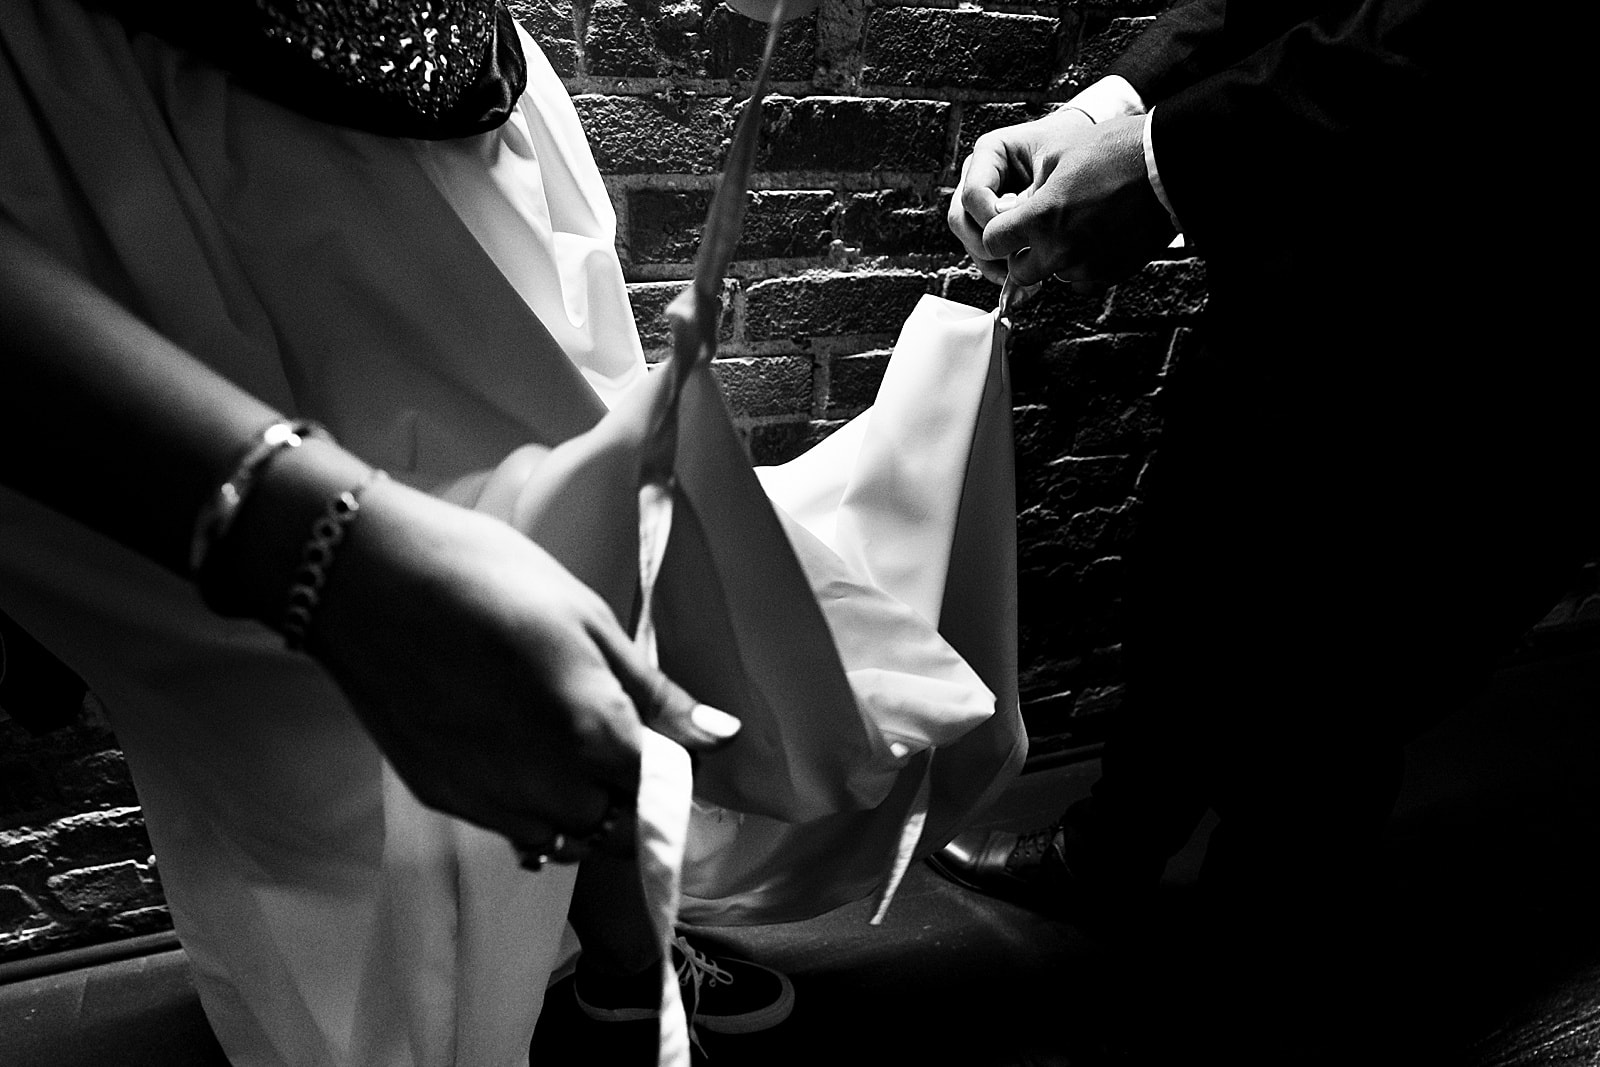 Groom helps bride bustle her dress - focus is on their hands and the ties